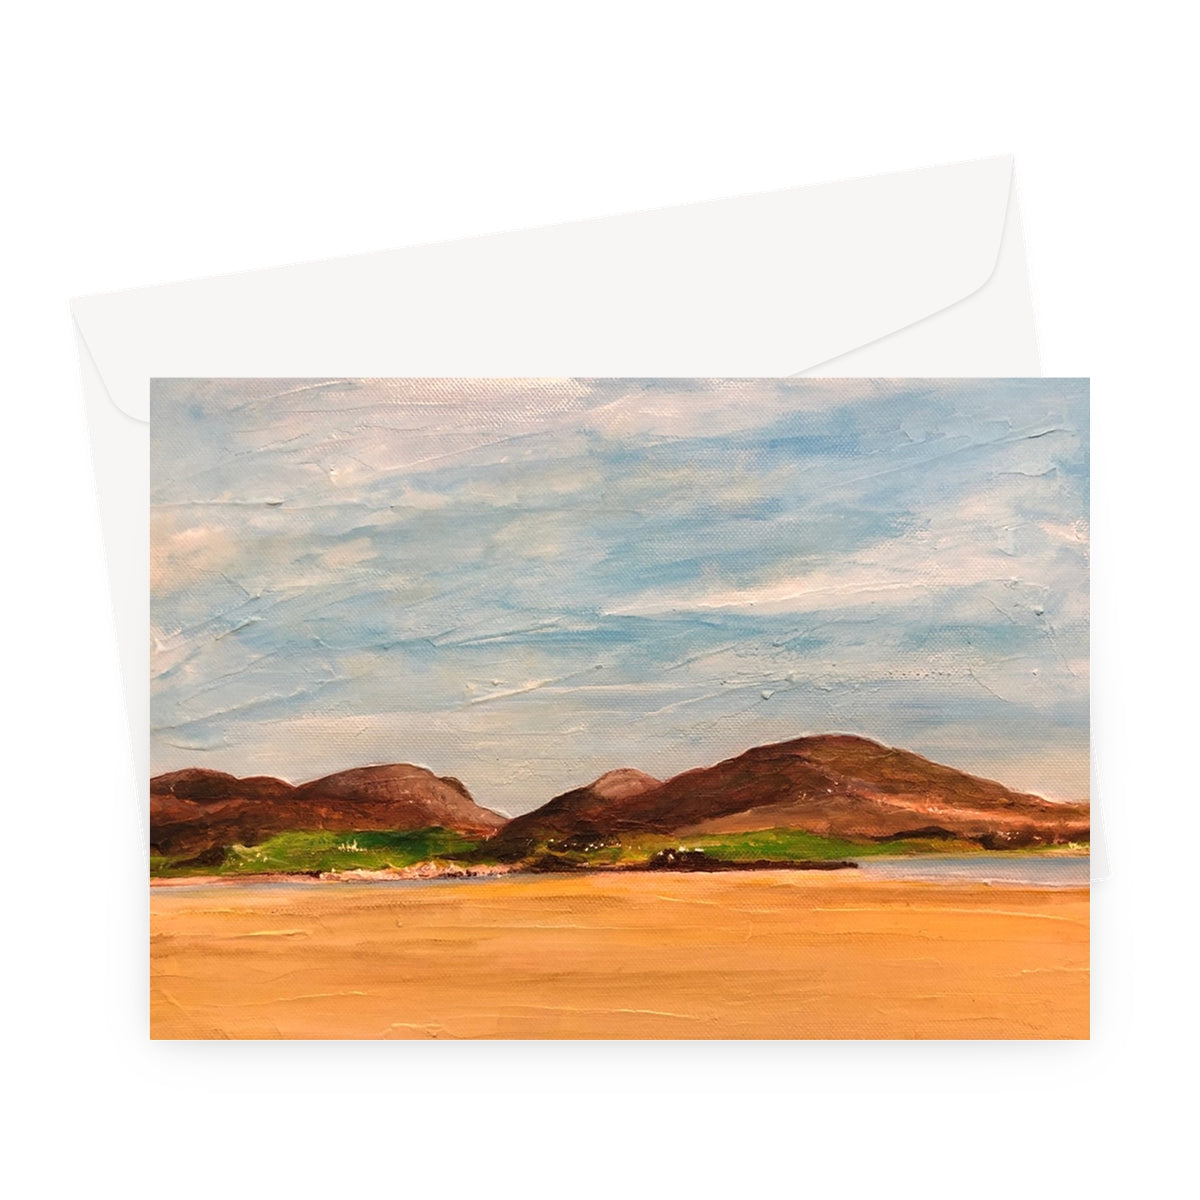 Uig Sands Lewis Art Gifts Greeting Card-Greetings Cards-Hebridean Islands Art Gallery-A5 Landscape-1 Card-Paintings, Prints, Homeware, Art Gifts From Scotland By Scottish Artist Kevin Hunter